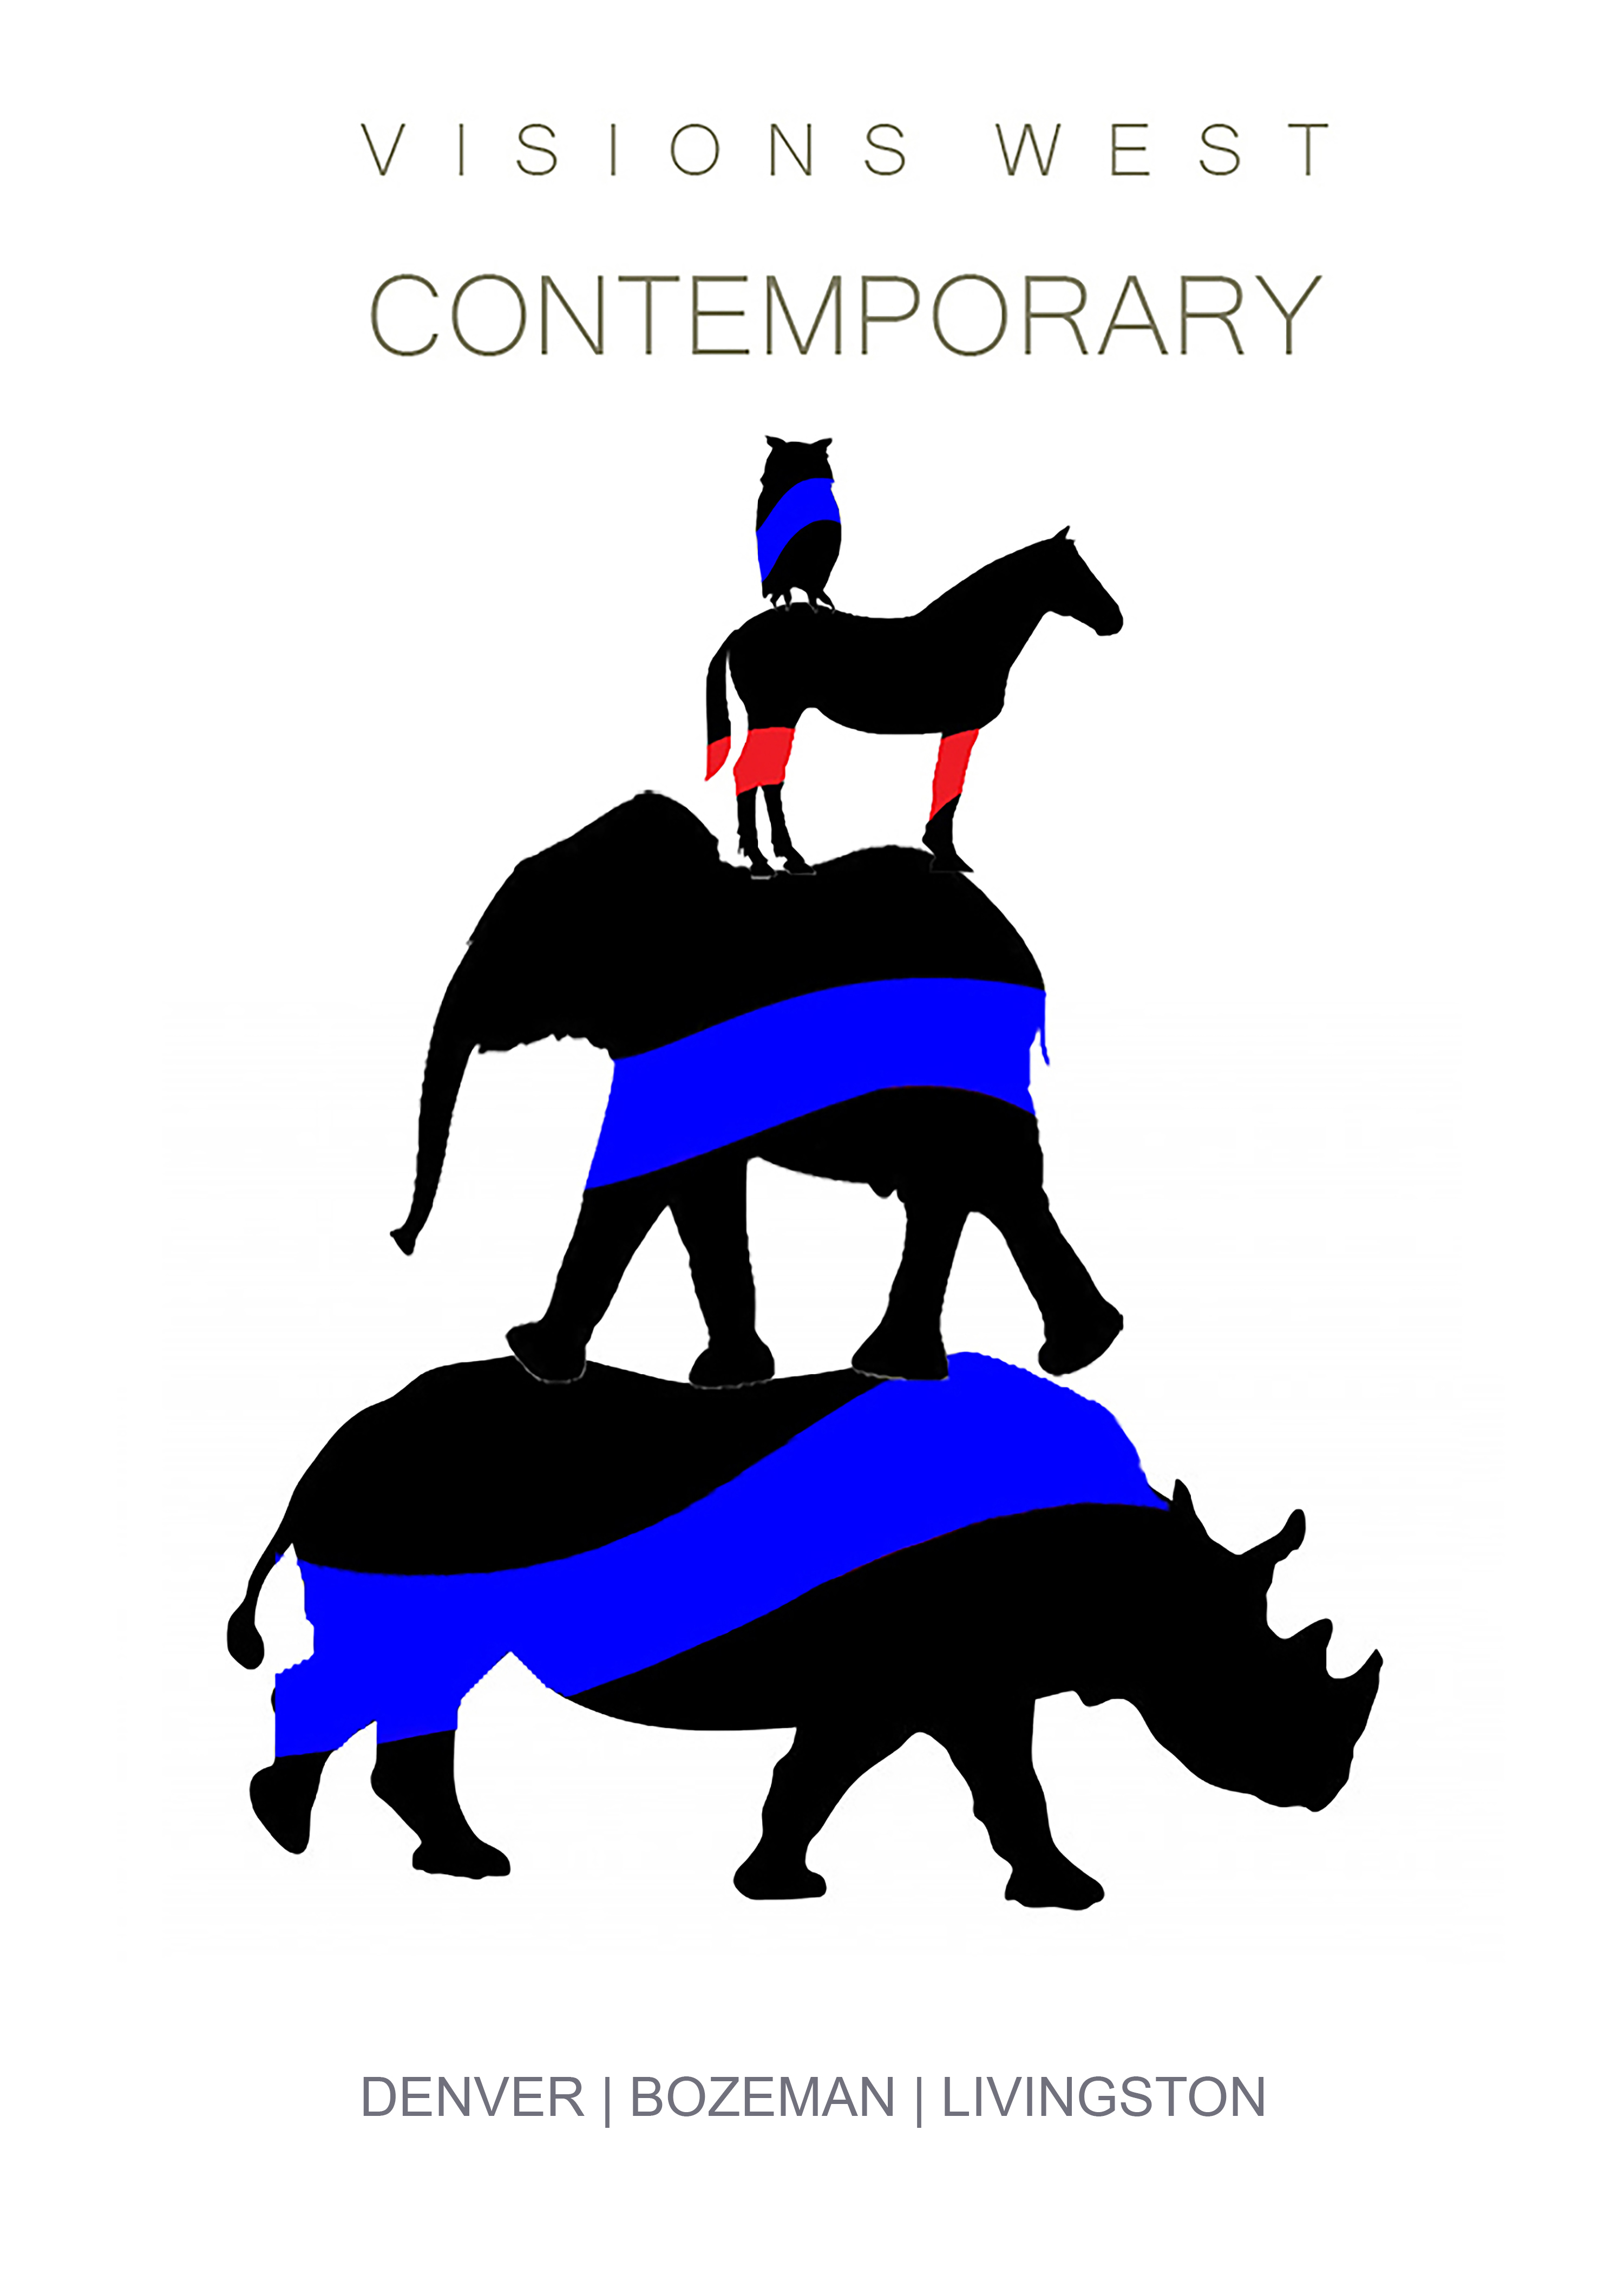 Logo that reads, "Visions West Contemporary" and shows animals stacked on top of each other.